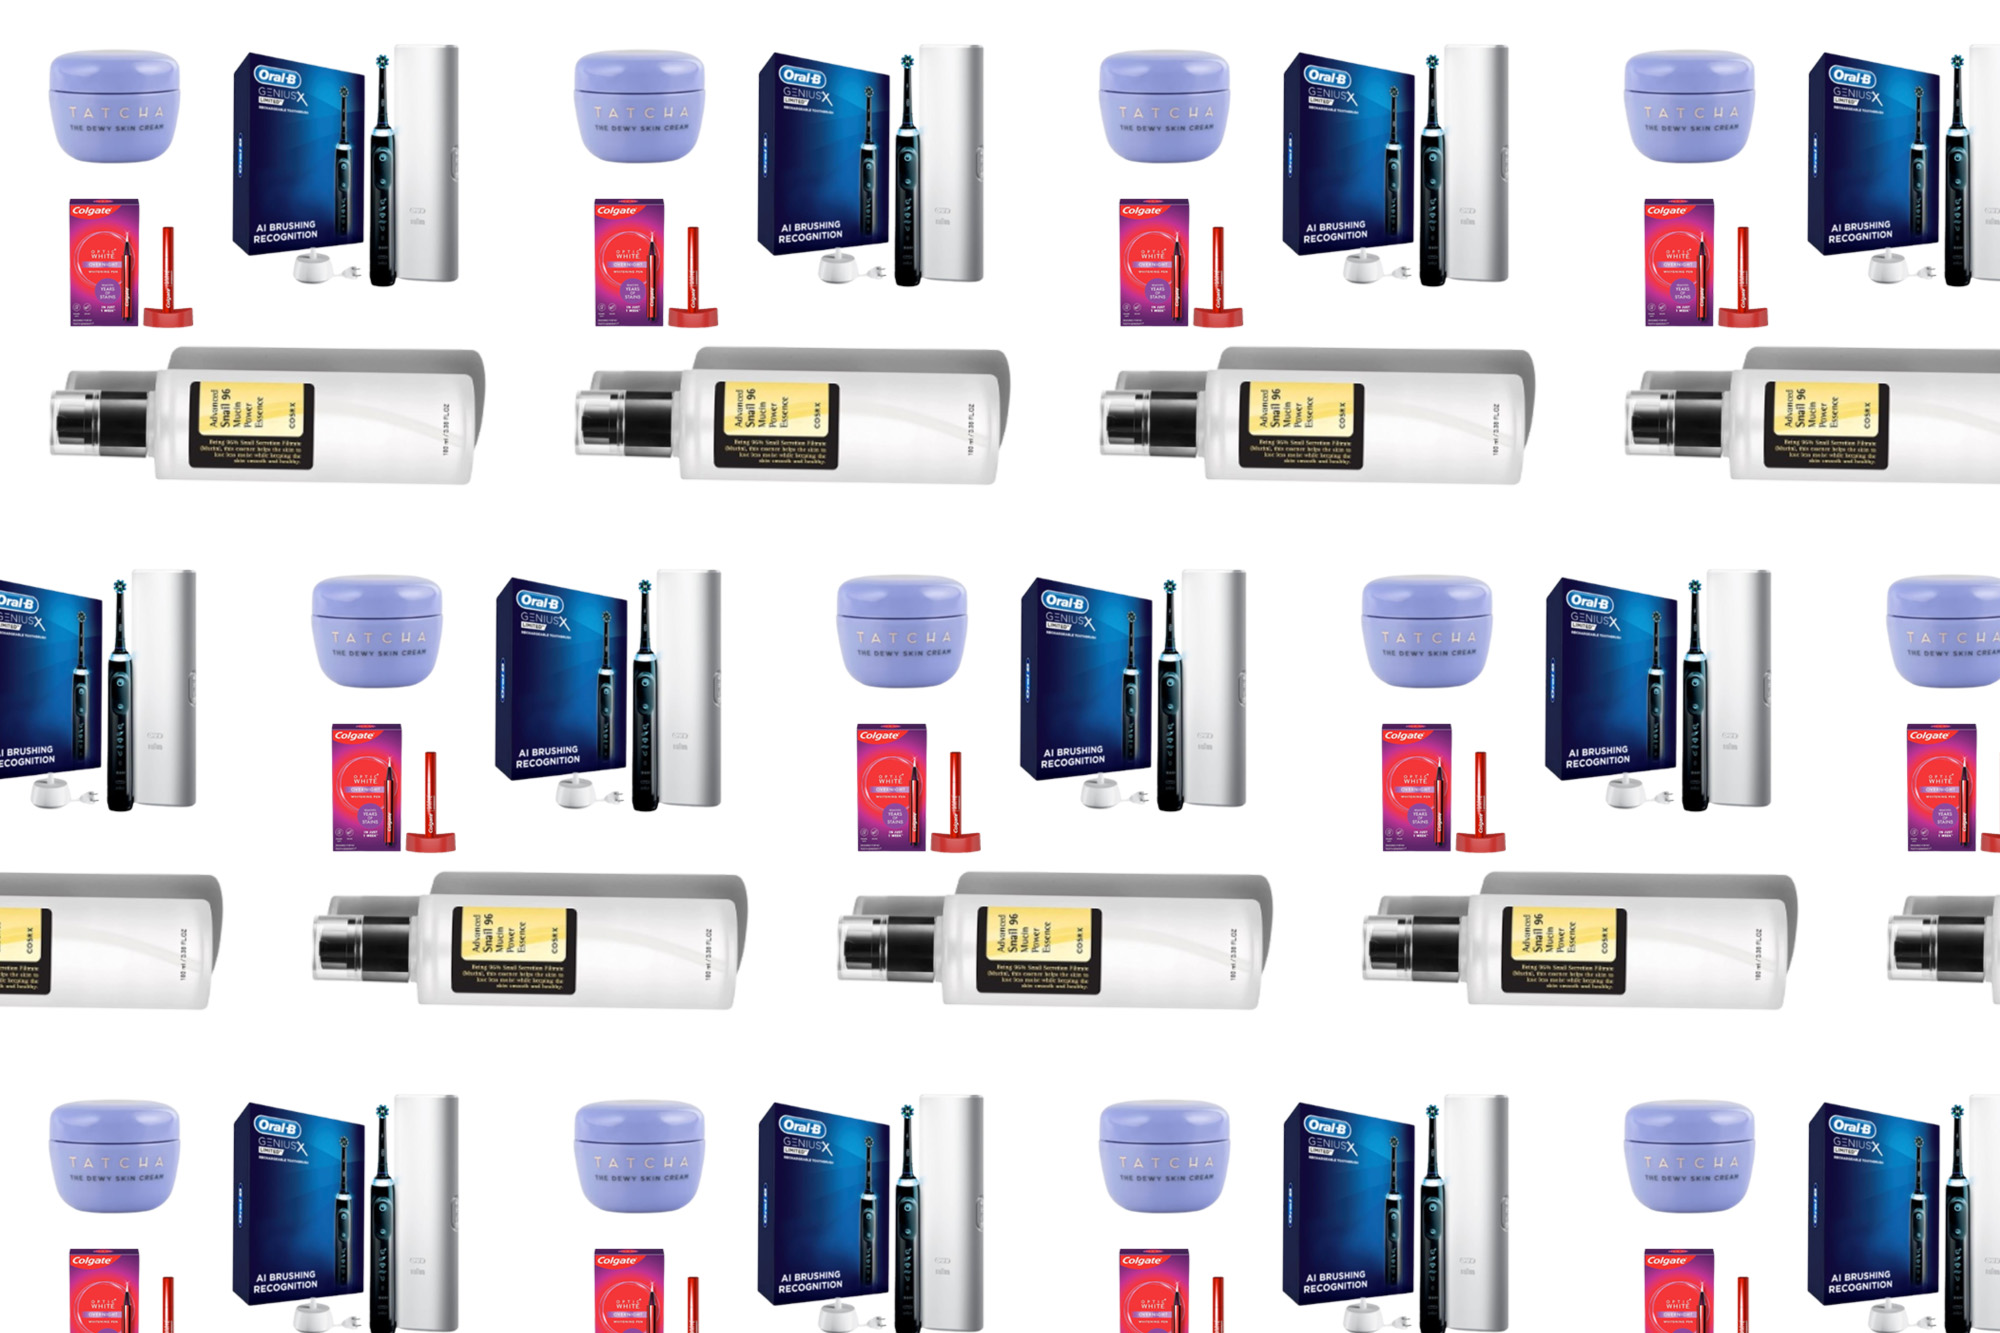 The best Amazon Prime Day beauty and personal care deals on Crest, Oral-B, and more